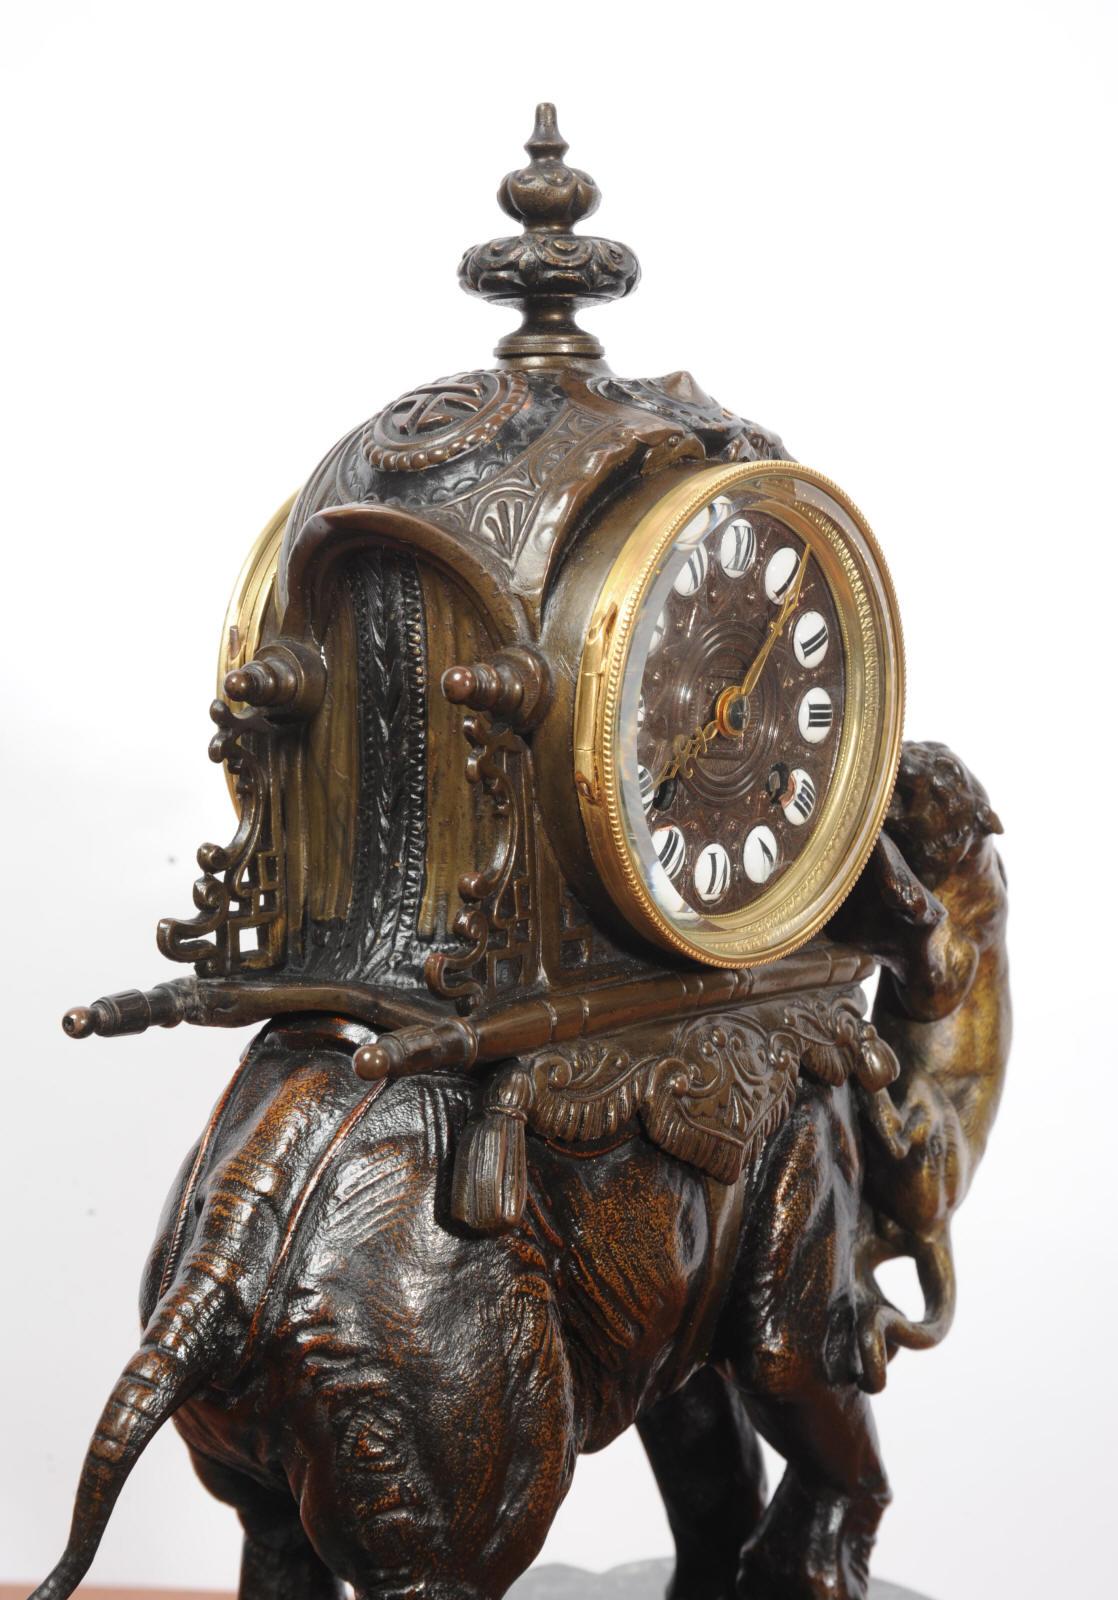 Metal Antique French Clock - Elephant - The Mahout Fending Off A Tiger